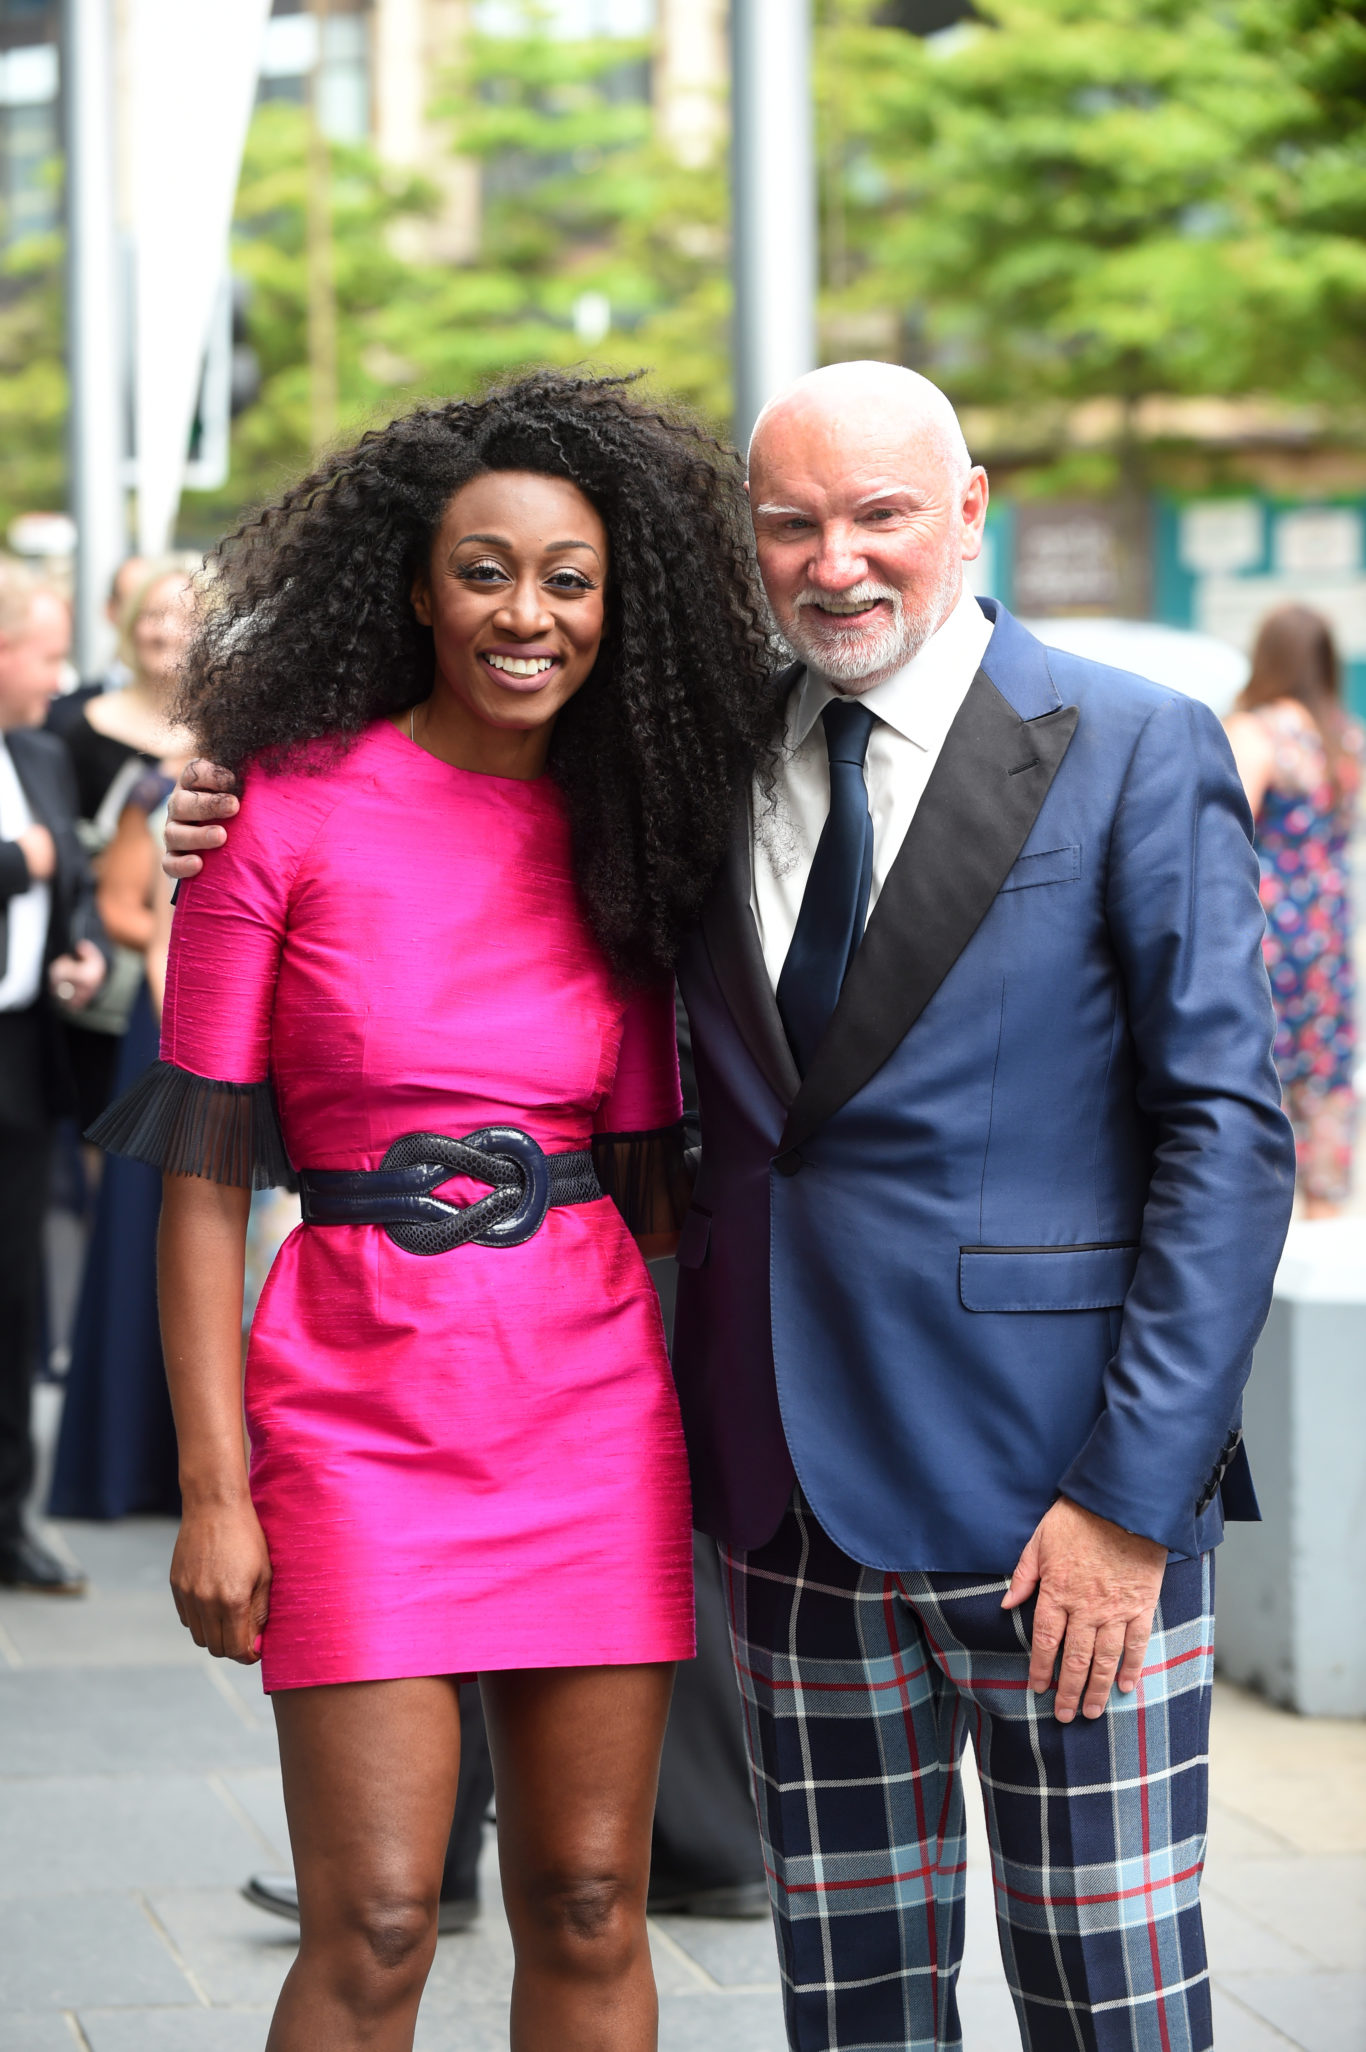 Sir Tom Hunter and singer Beverley Knight arrive at the EICC